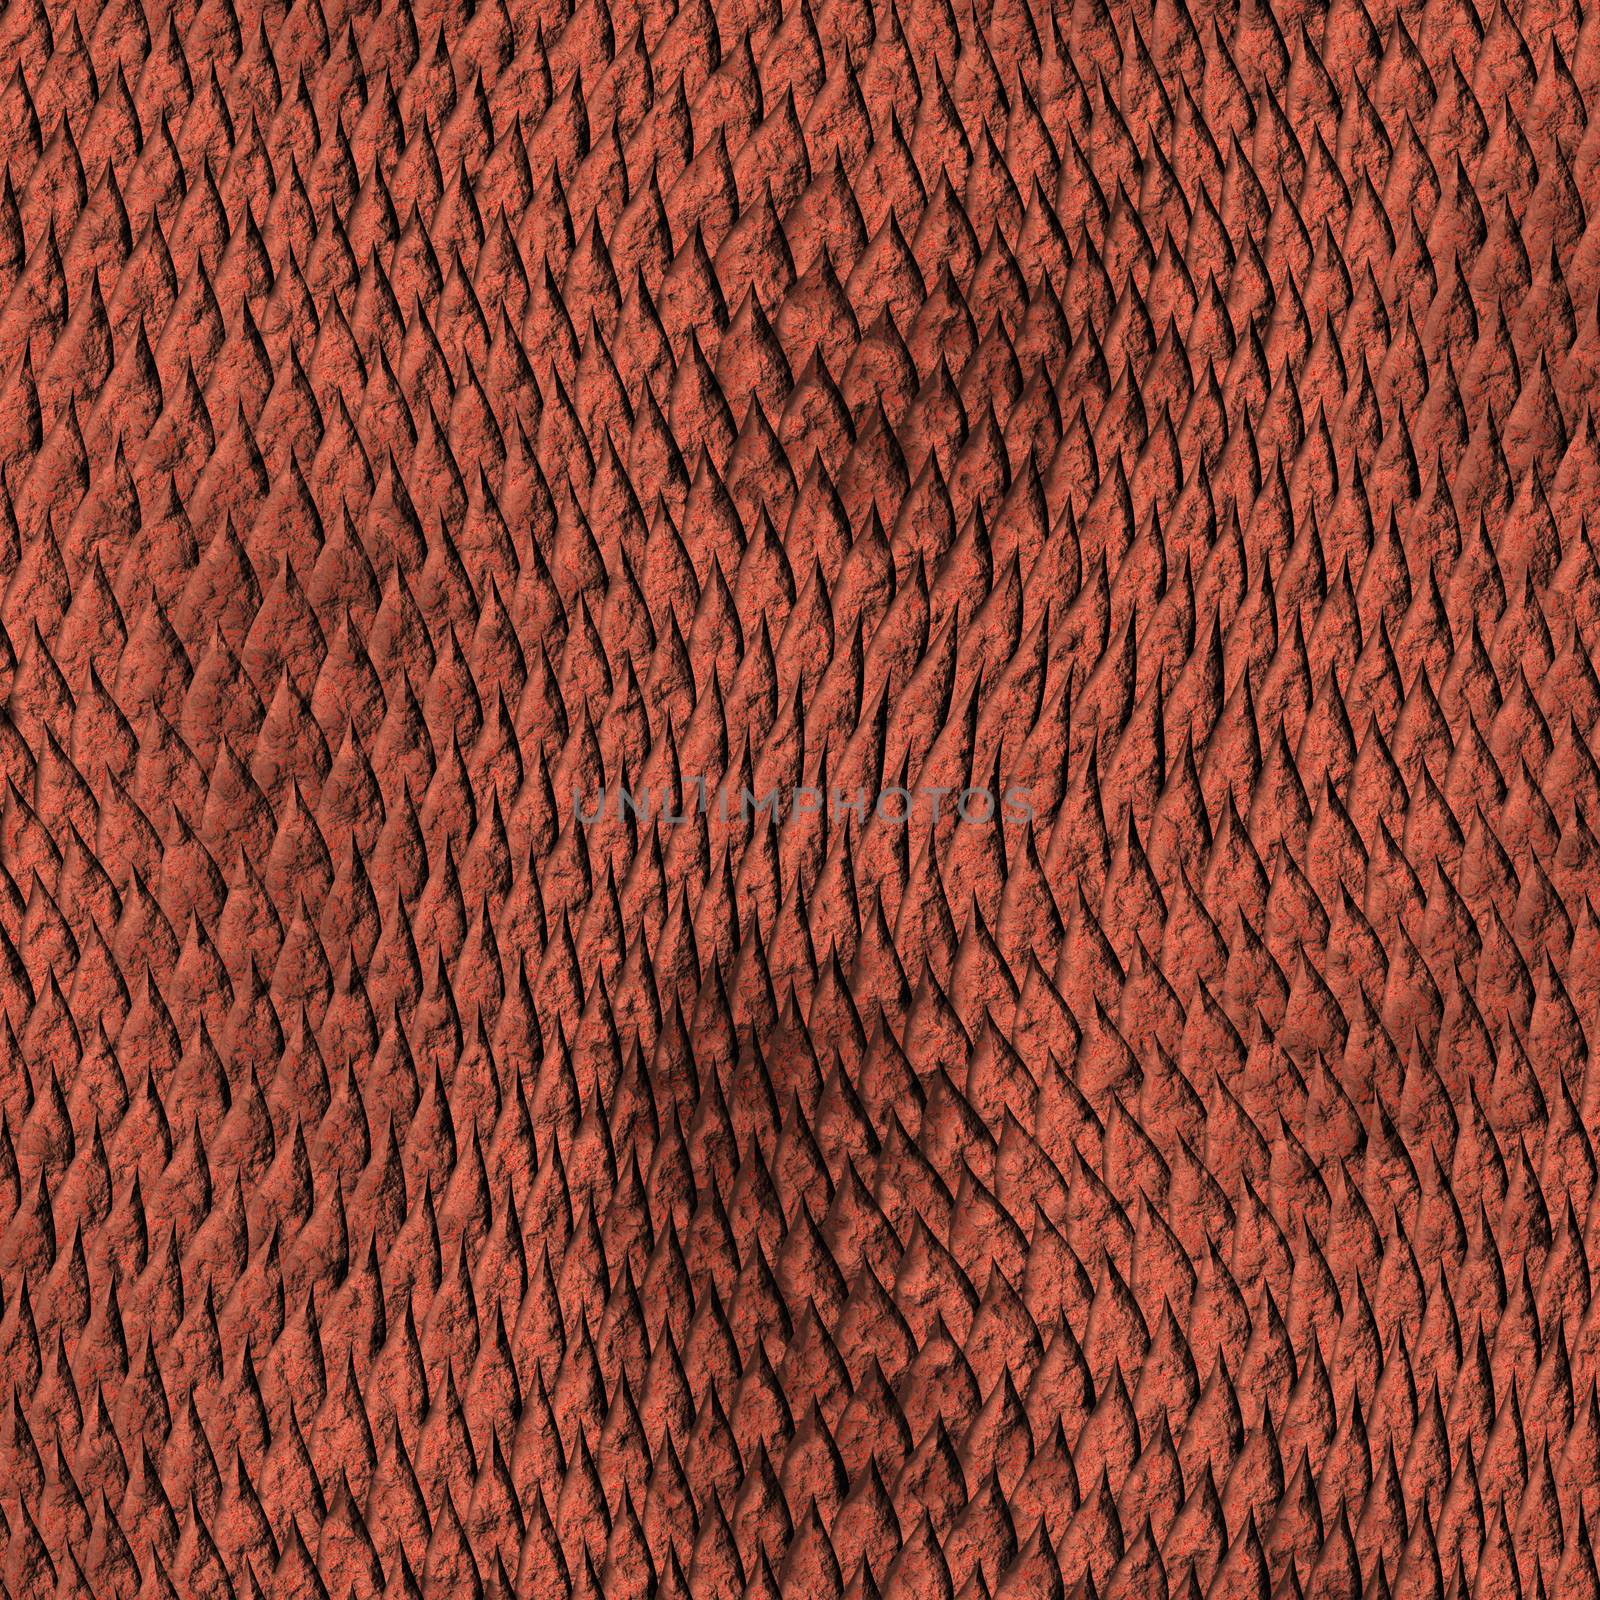 A red-brown dragon scale textured background by sfinks